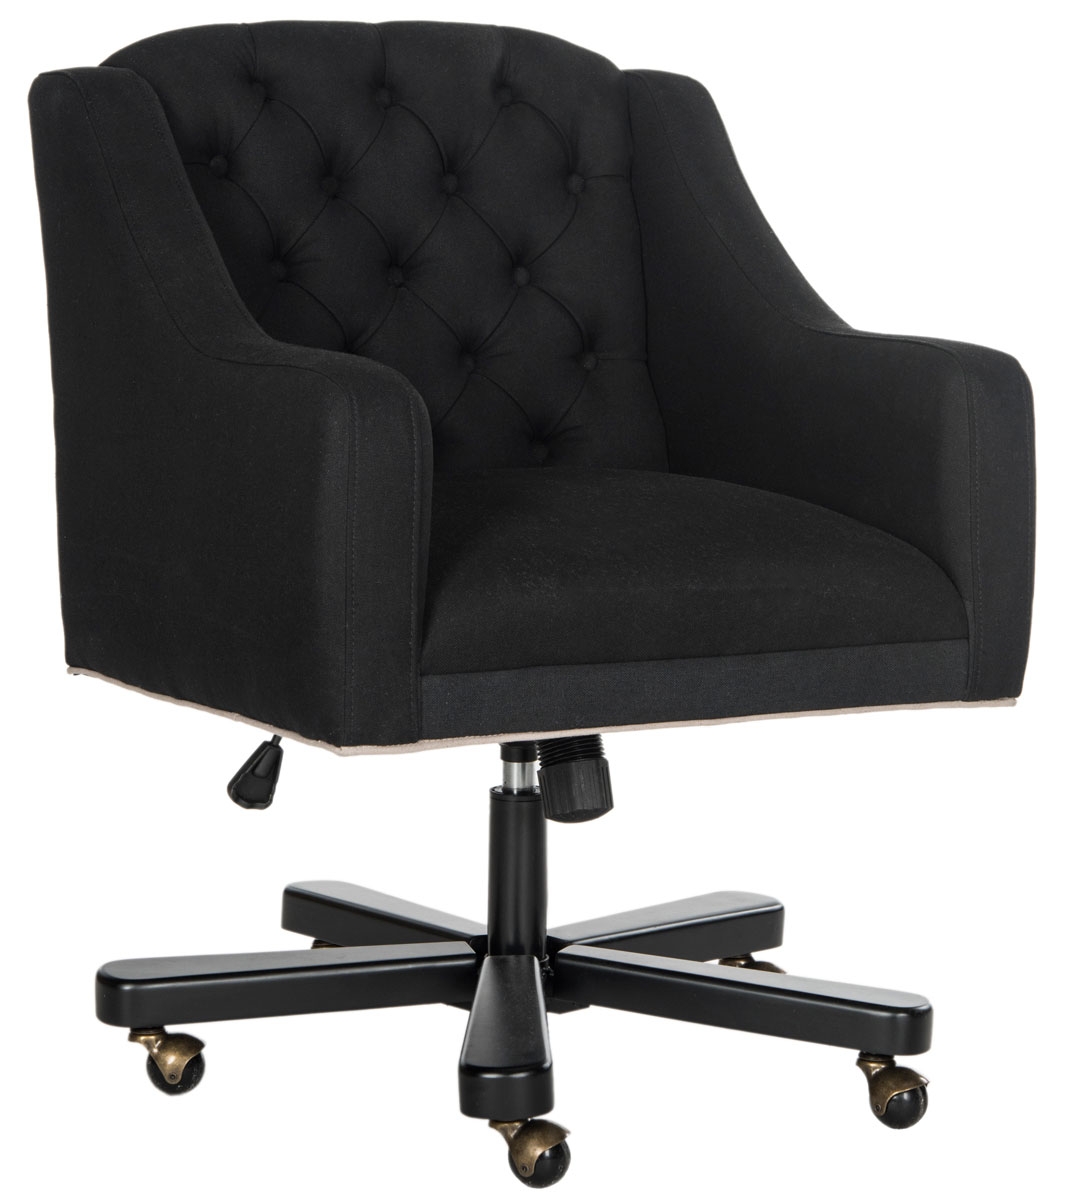 Salazar Office Chair - Black/Taupe - Arlo Home - Image 1